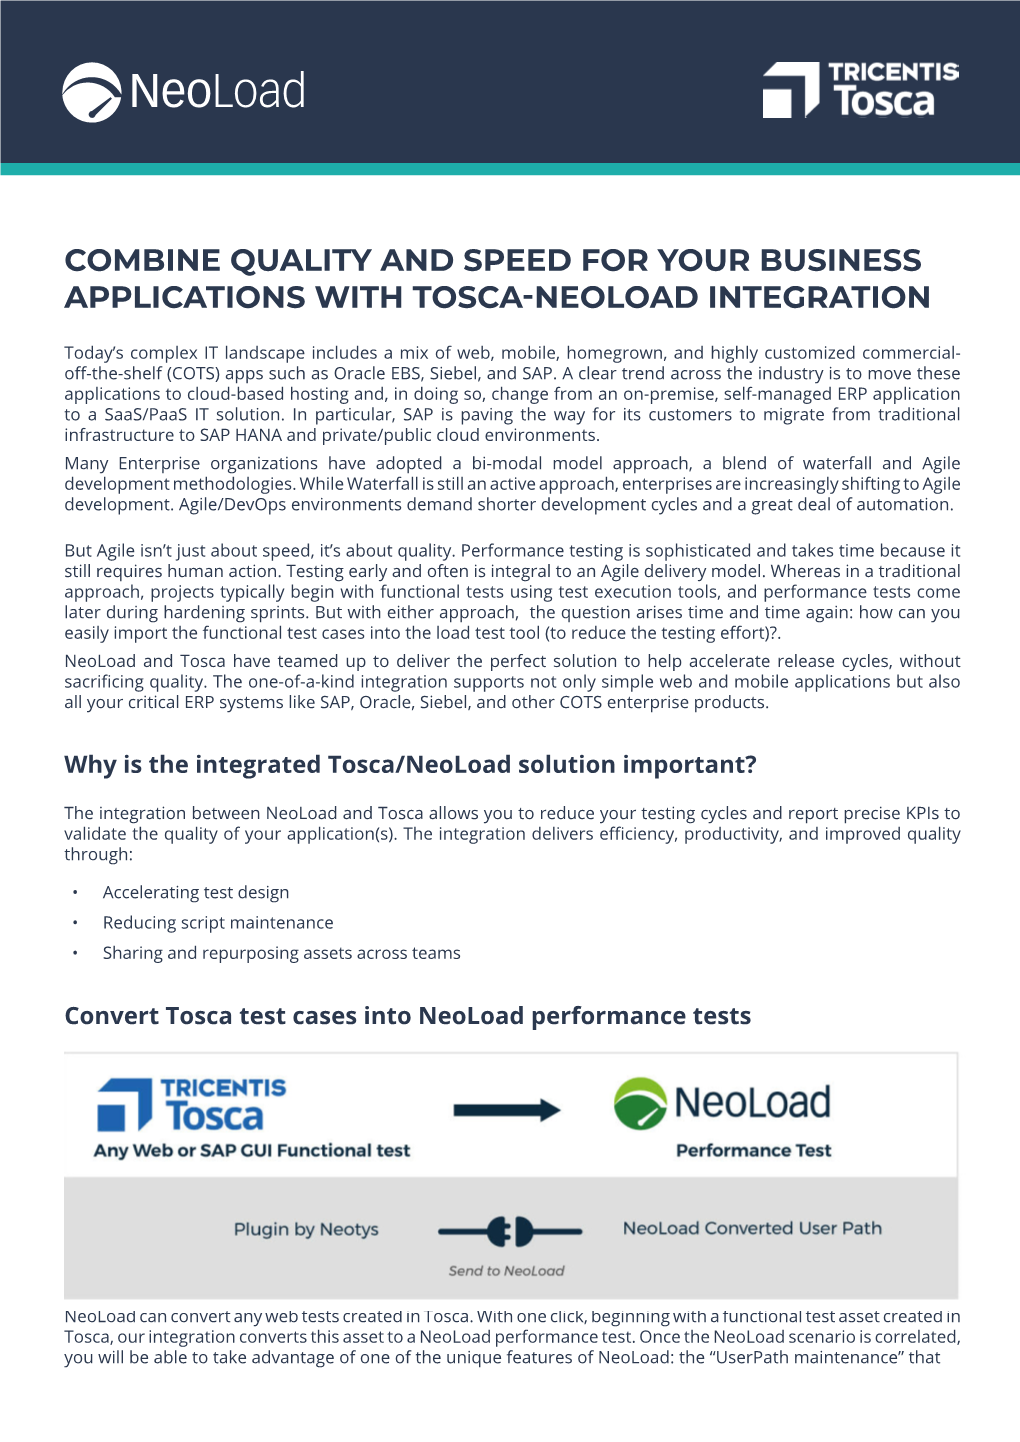 Combine Quality and Speed for Your Business Applications with Tosca-Neoload Integration